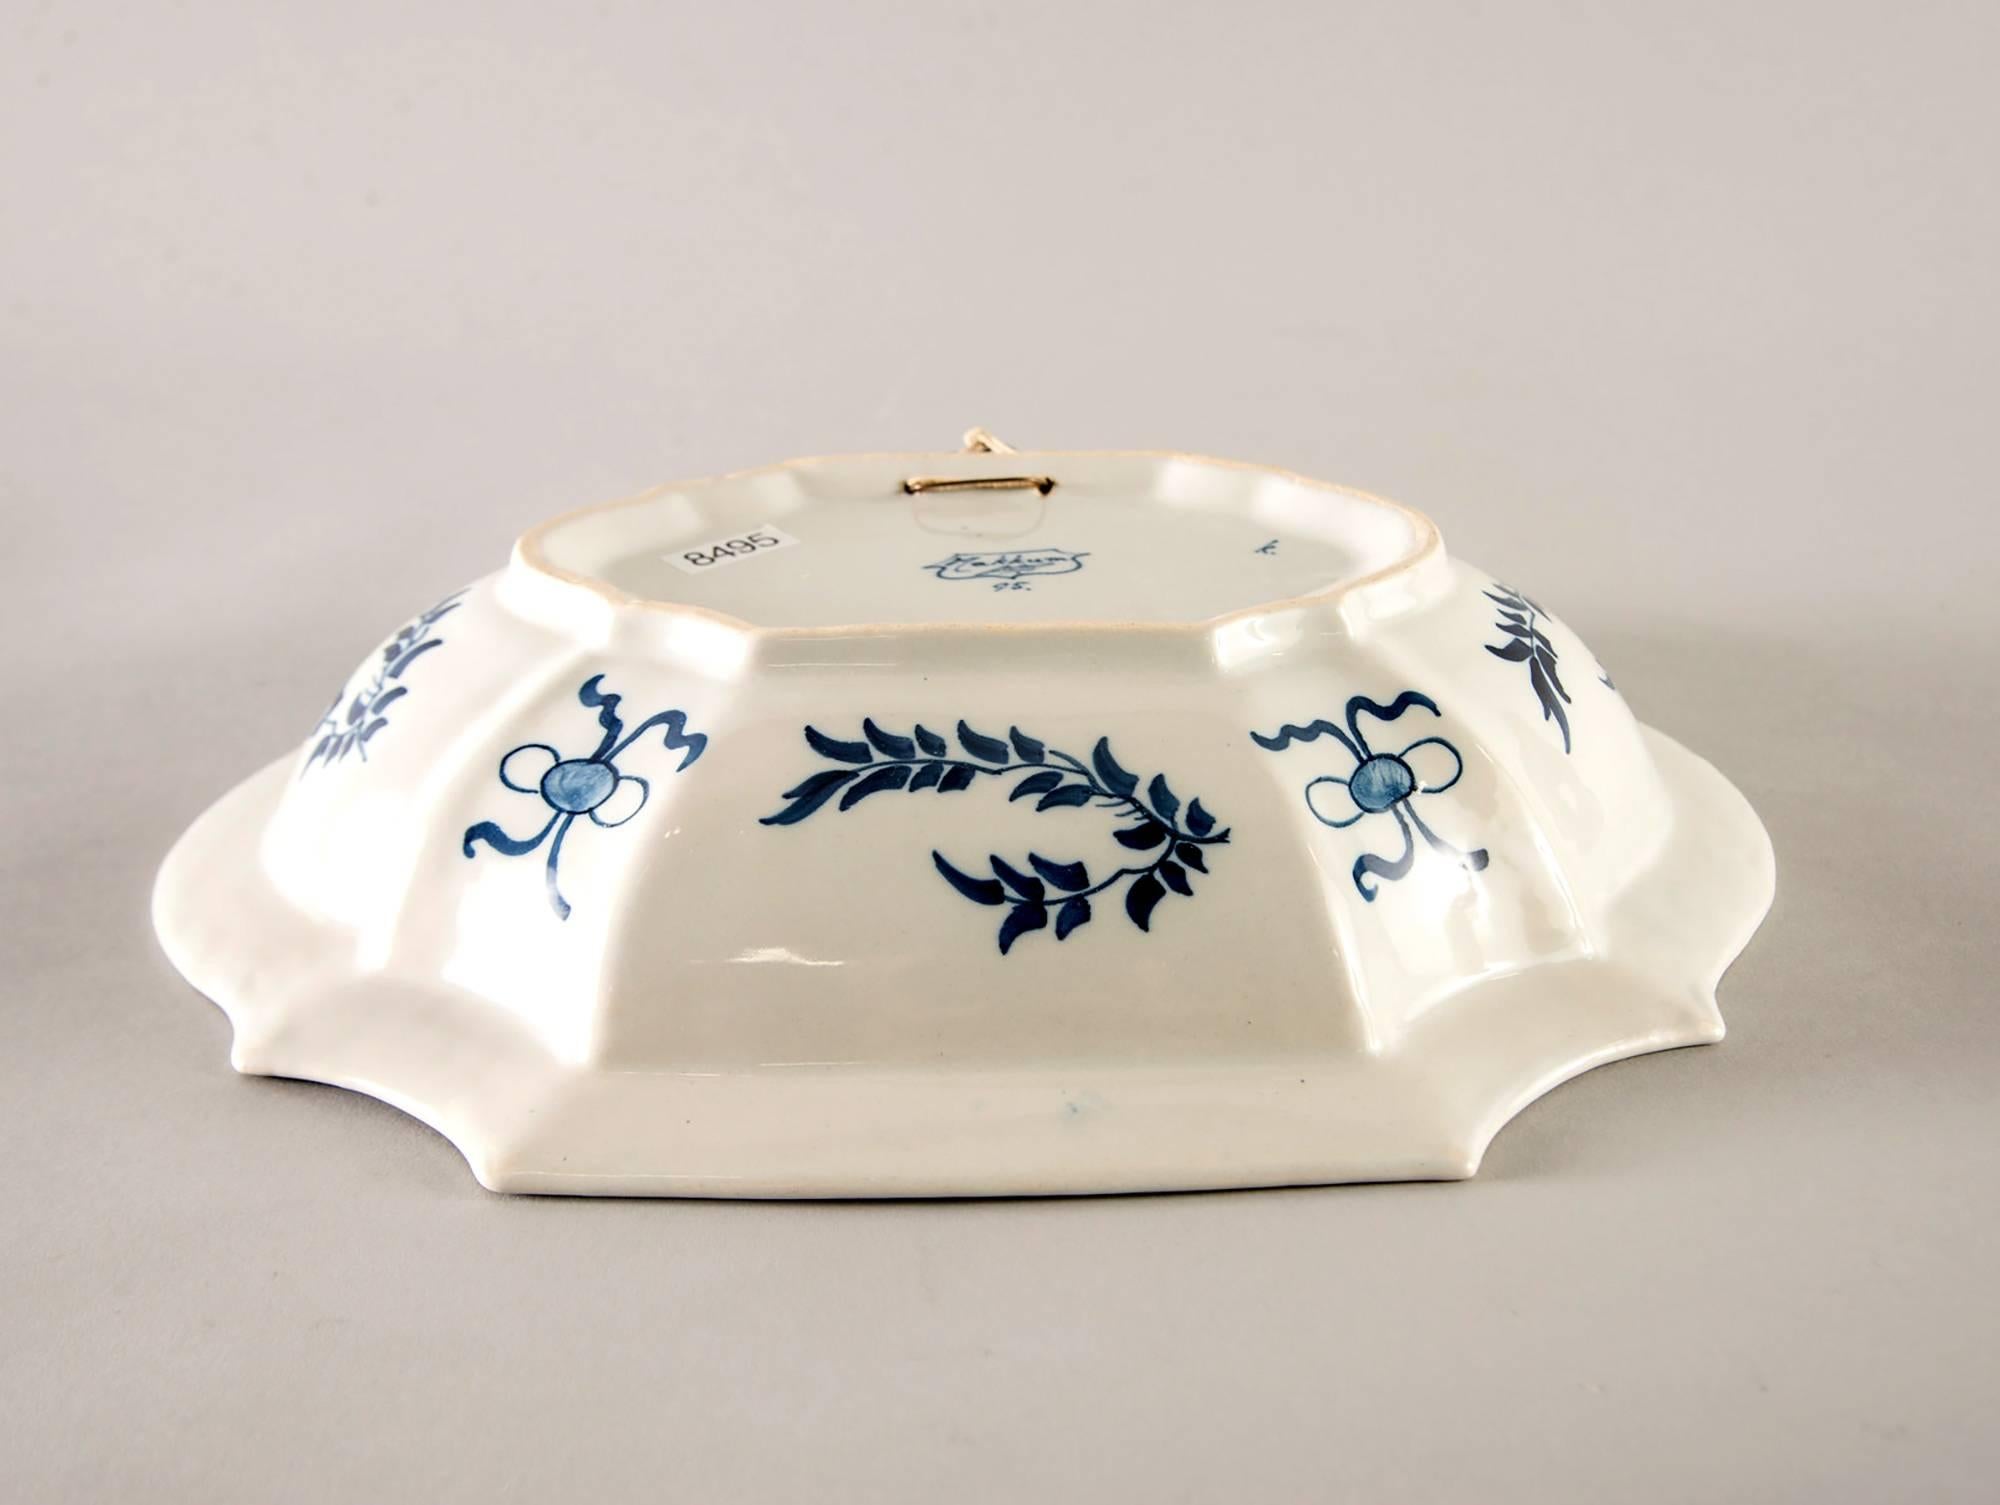 Dutch Blue and White Delft Platter with Chinoiserie Design